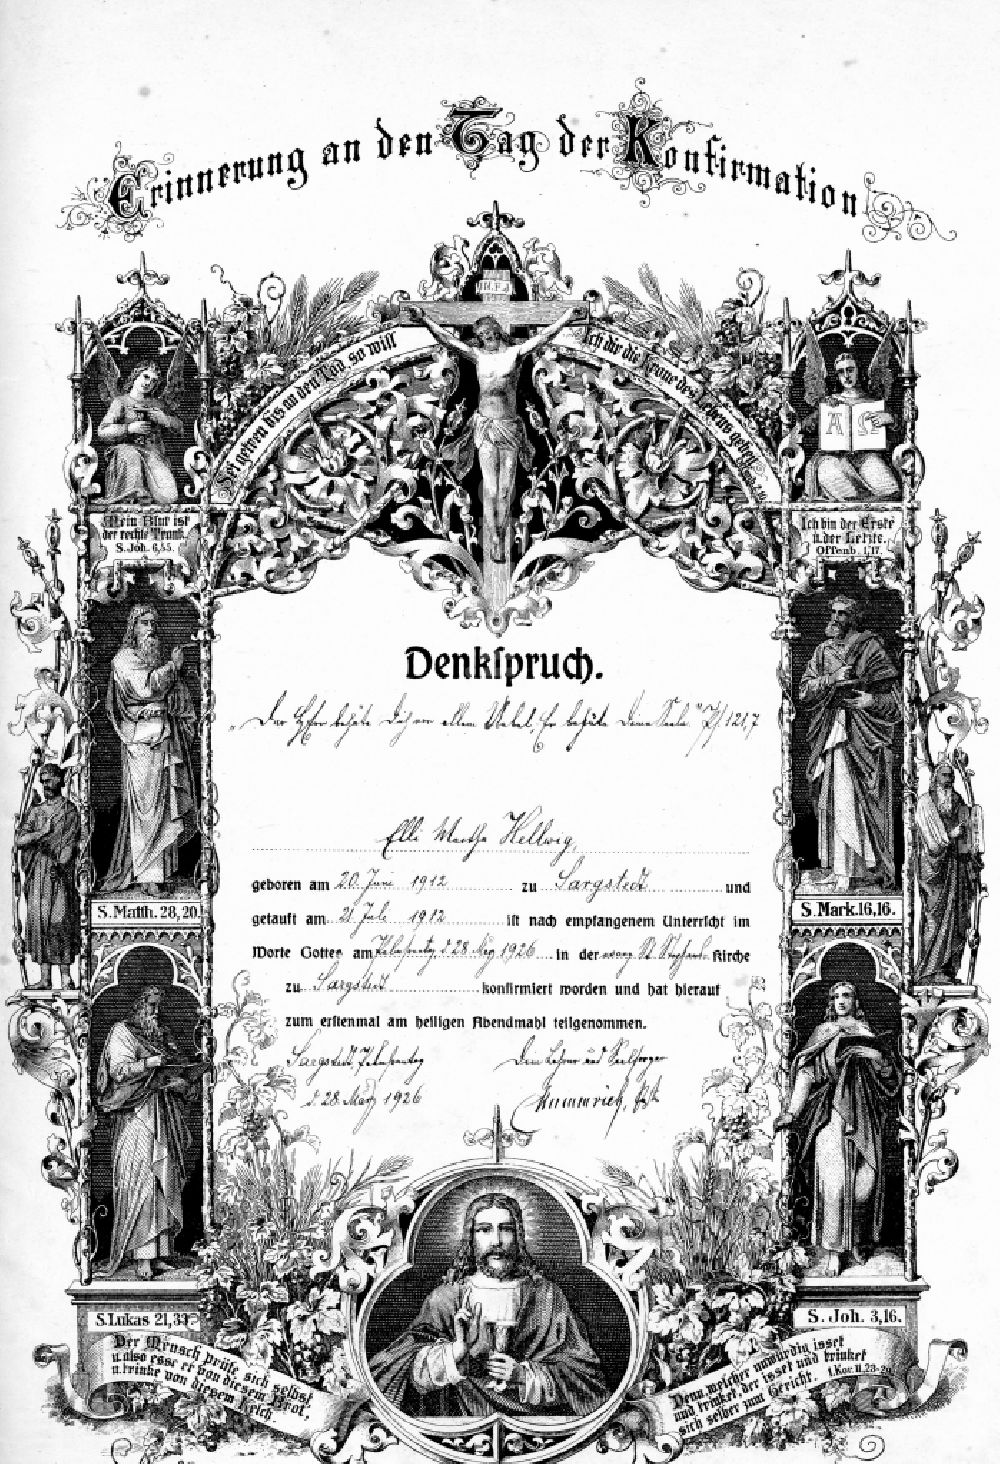 GDR image archive: Sargstedt - Reproduction Certificate of confirmation issued in Sargstedt in the state Saxony-Anhalt